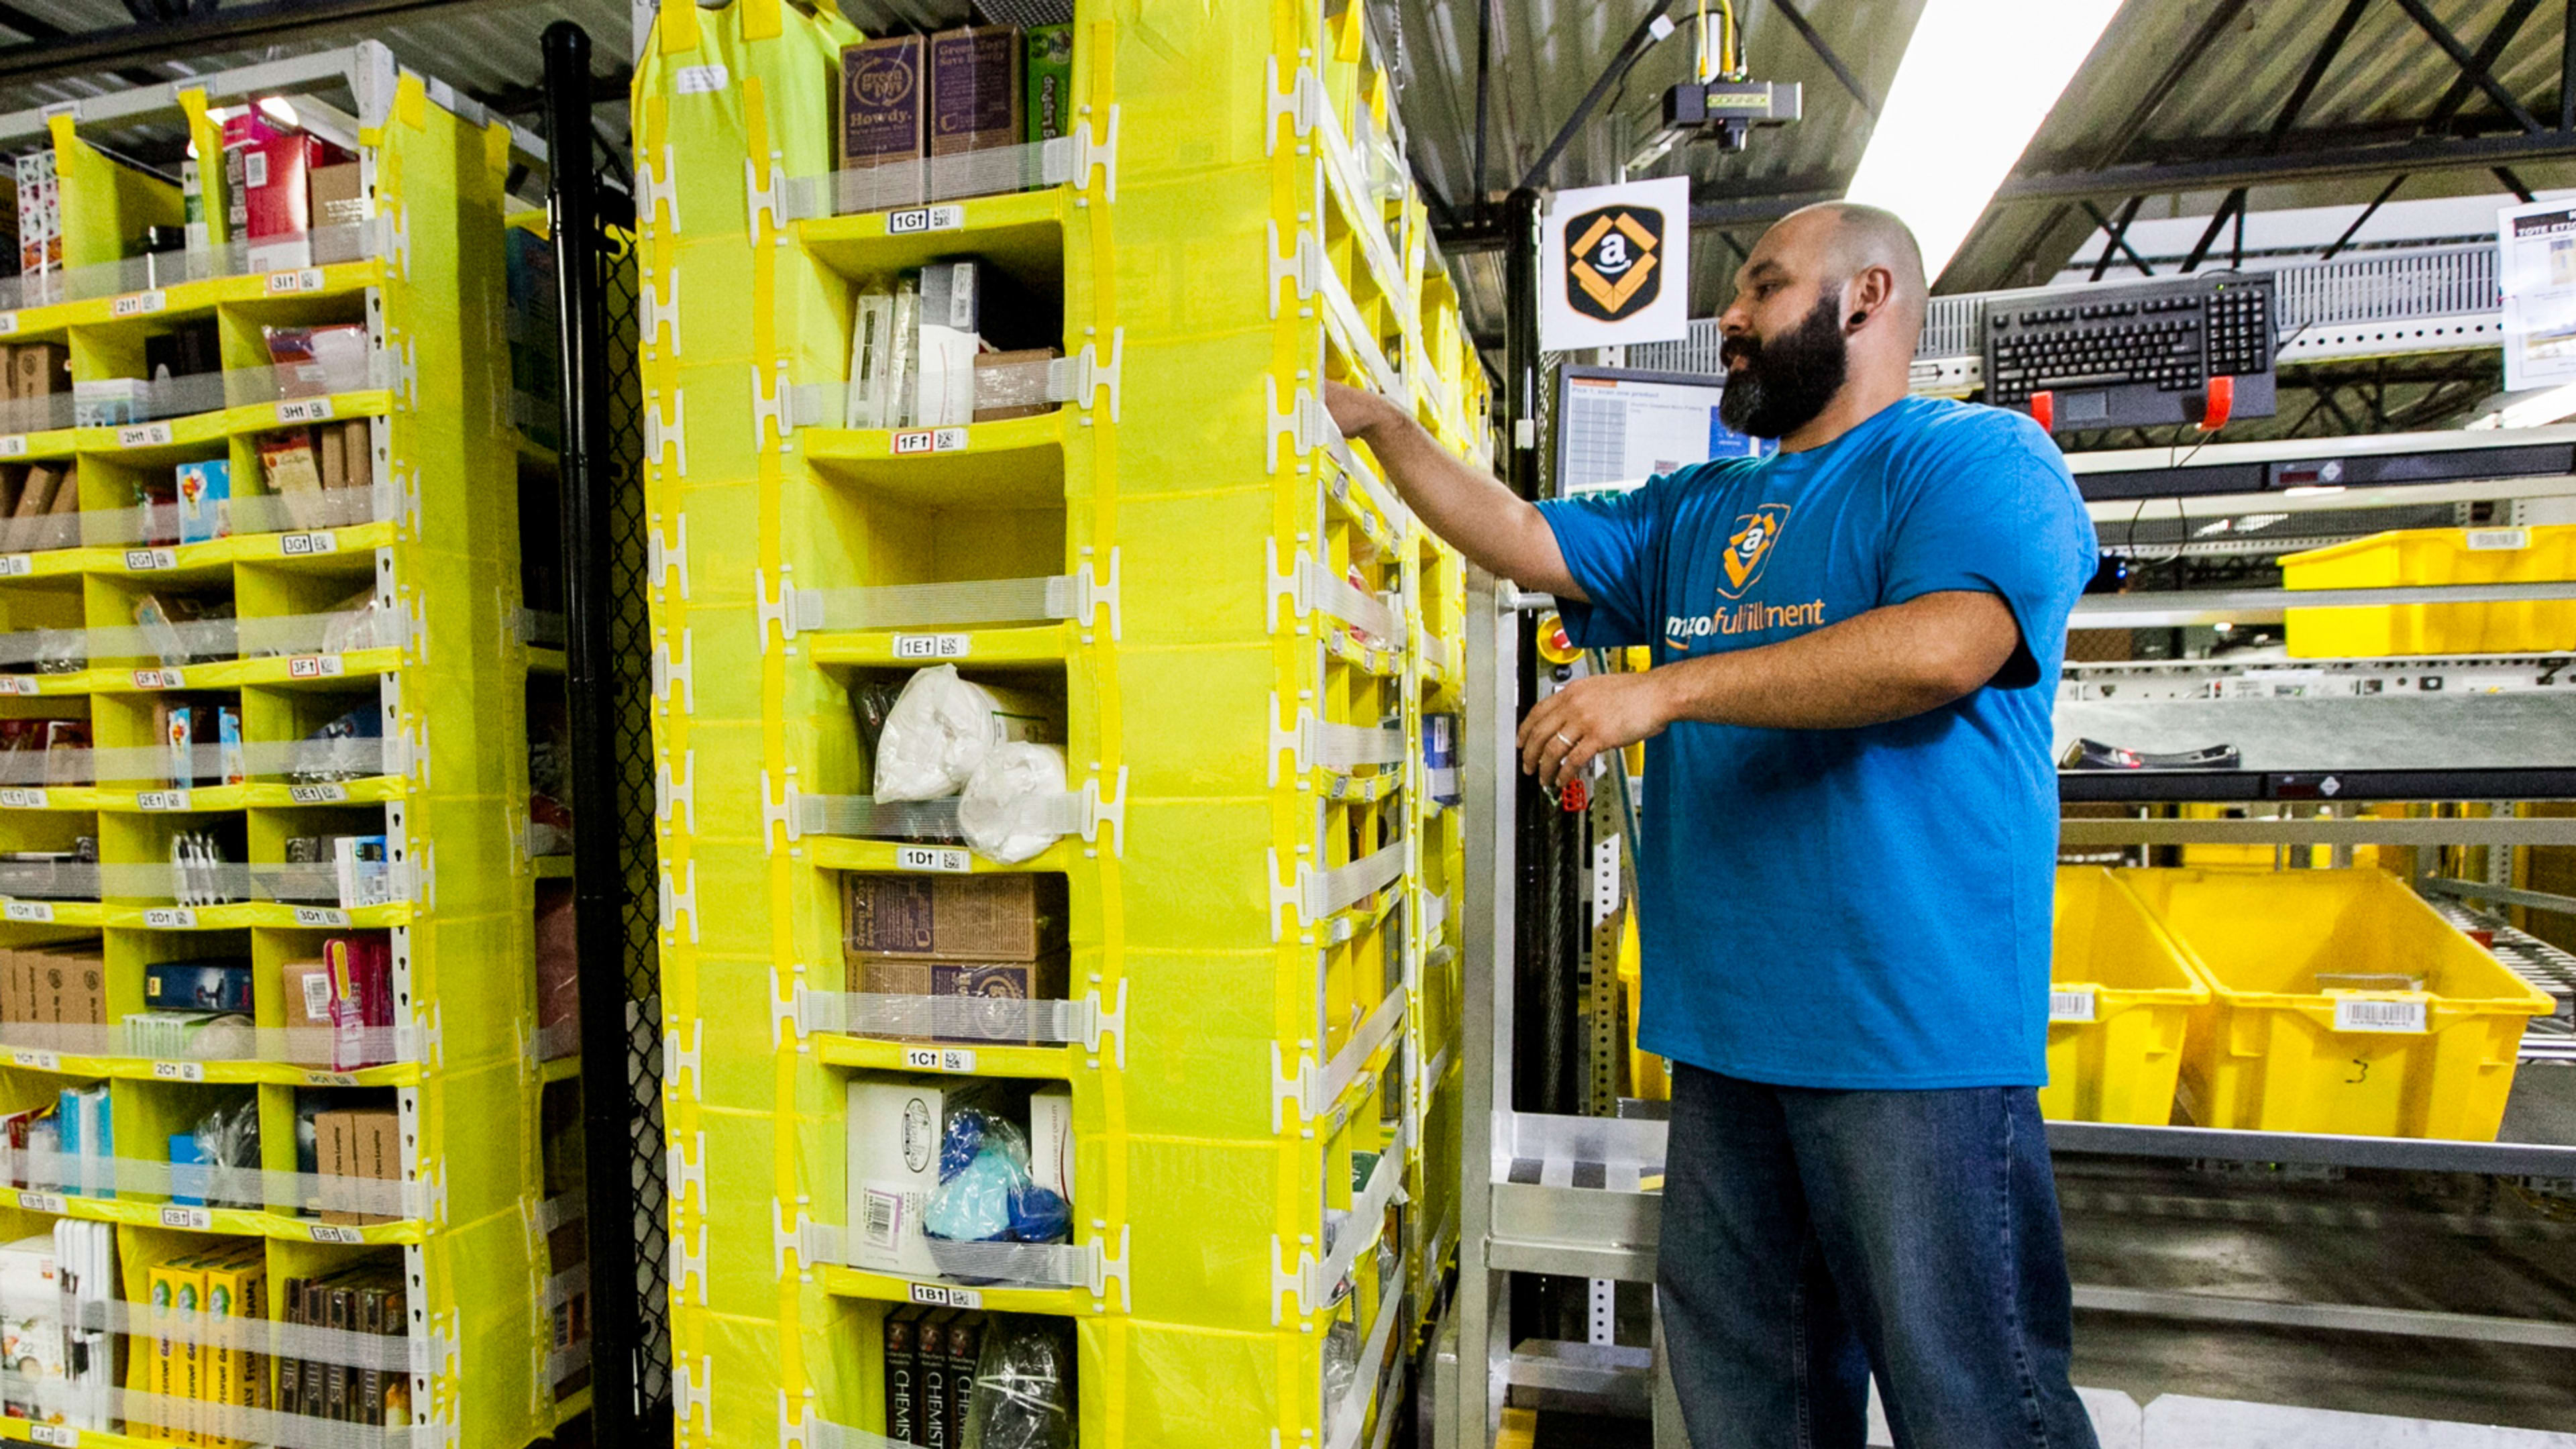 Amazon is hiring 30,000 permanent workers on September 17